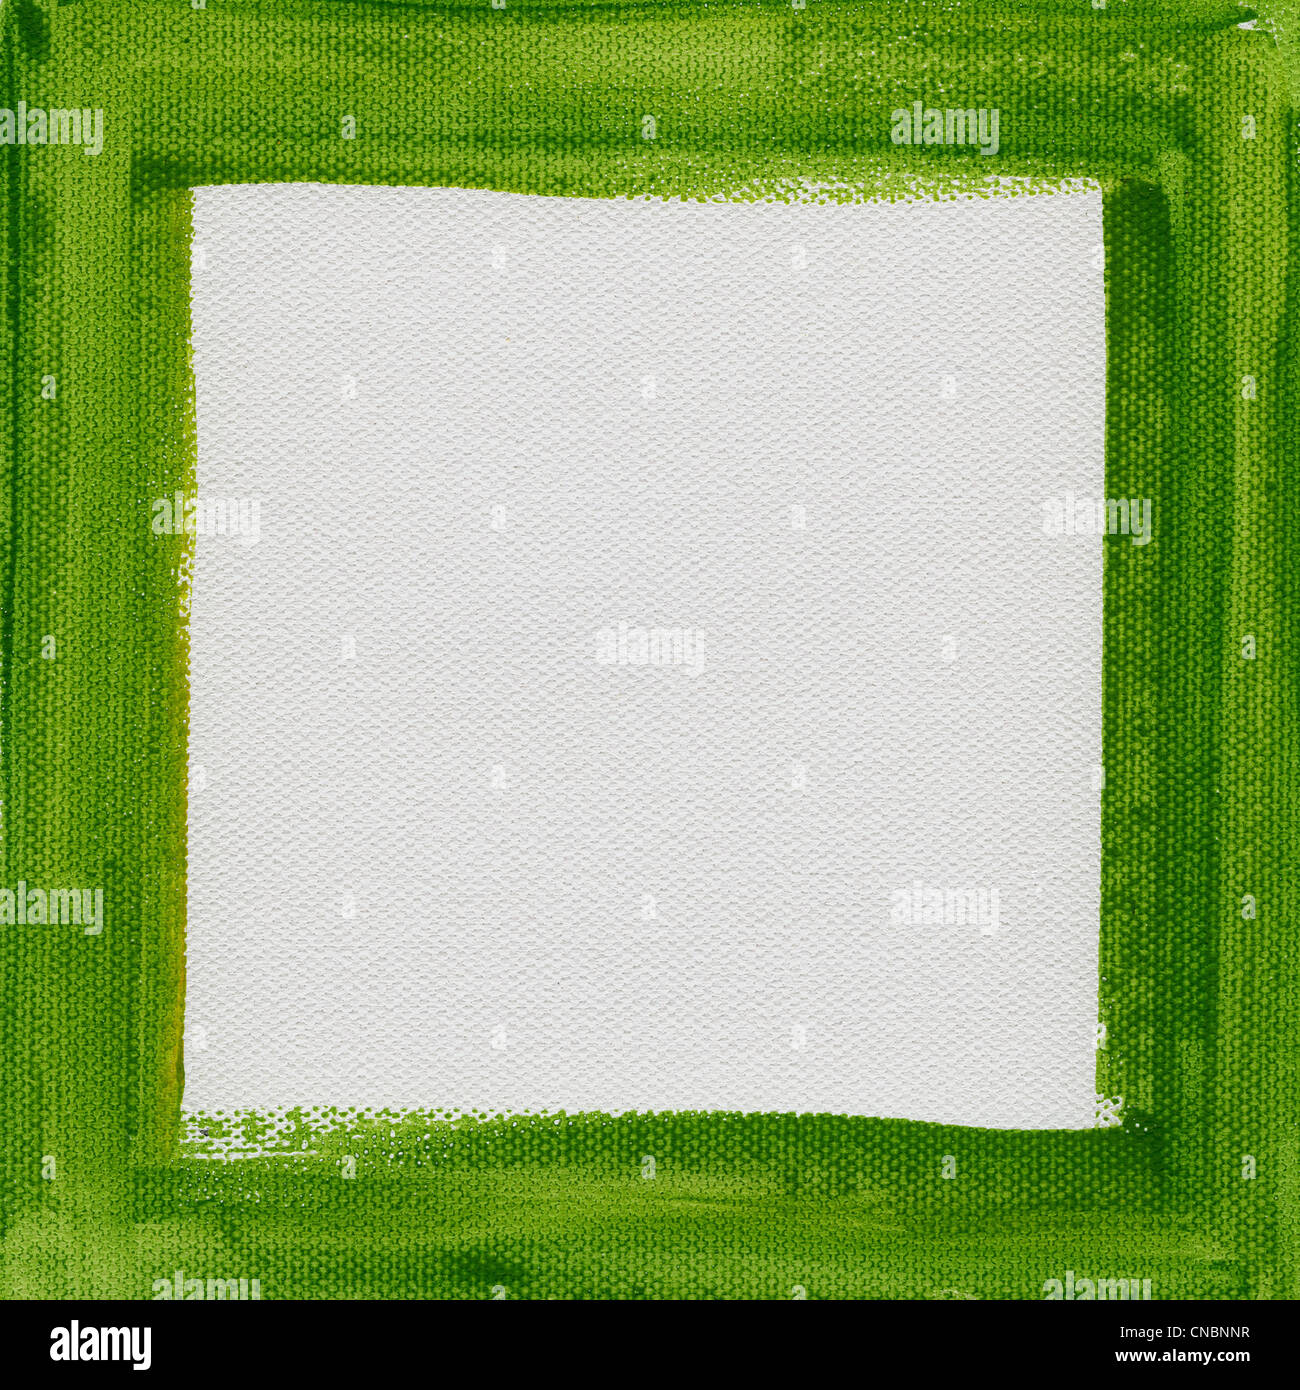 hand painted green watercolor frame (border) surrounding white blank square on artist canvas Stock Photo